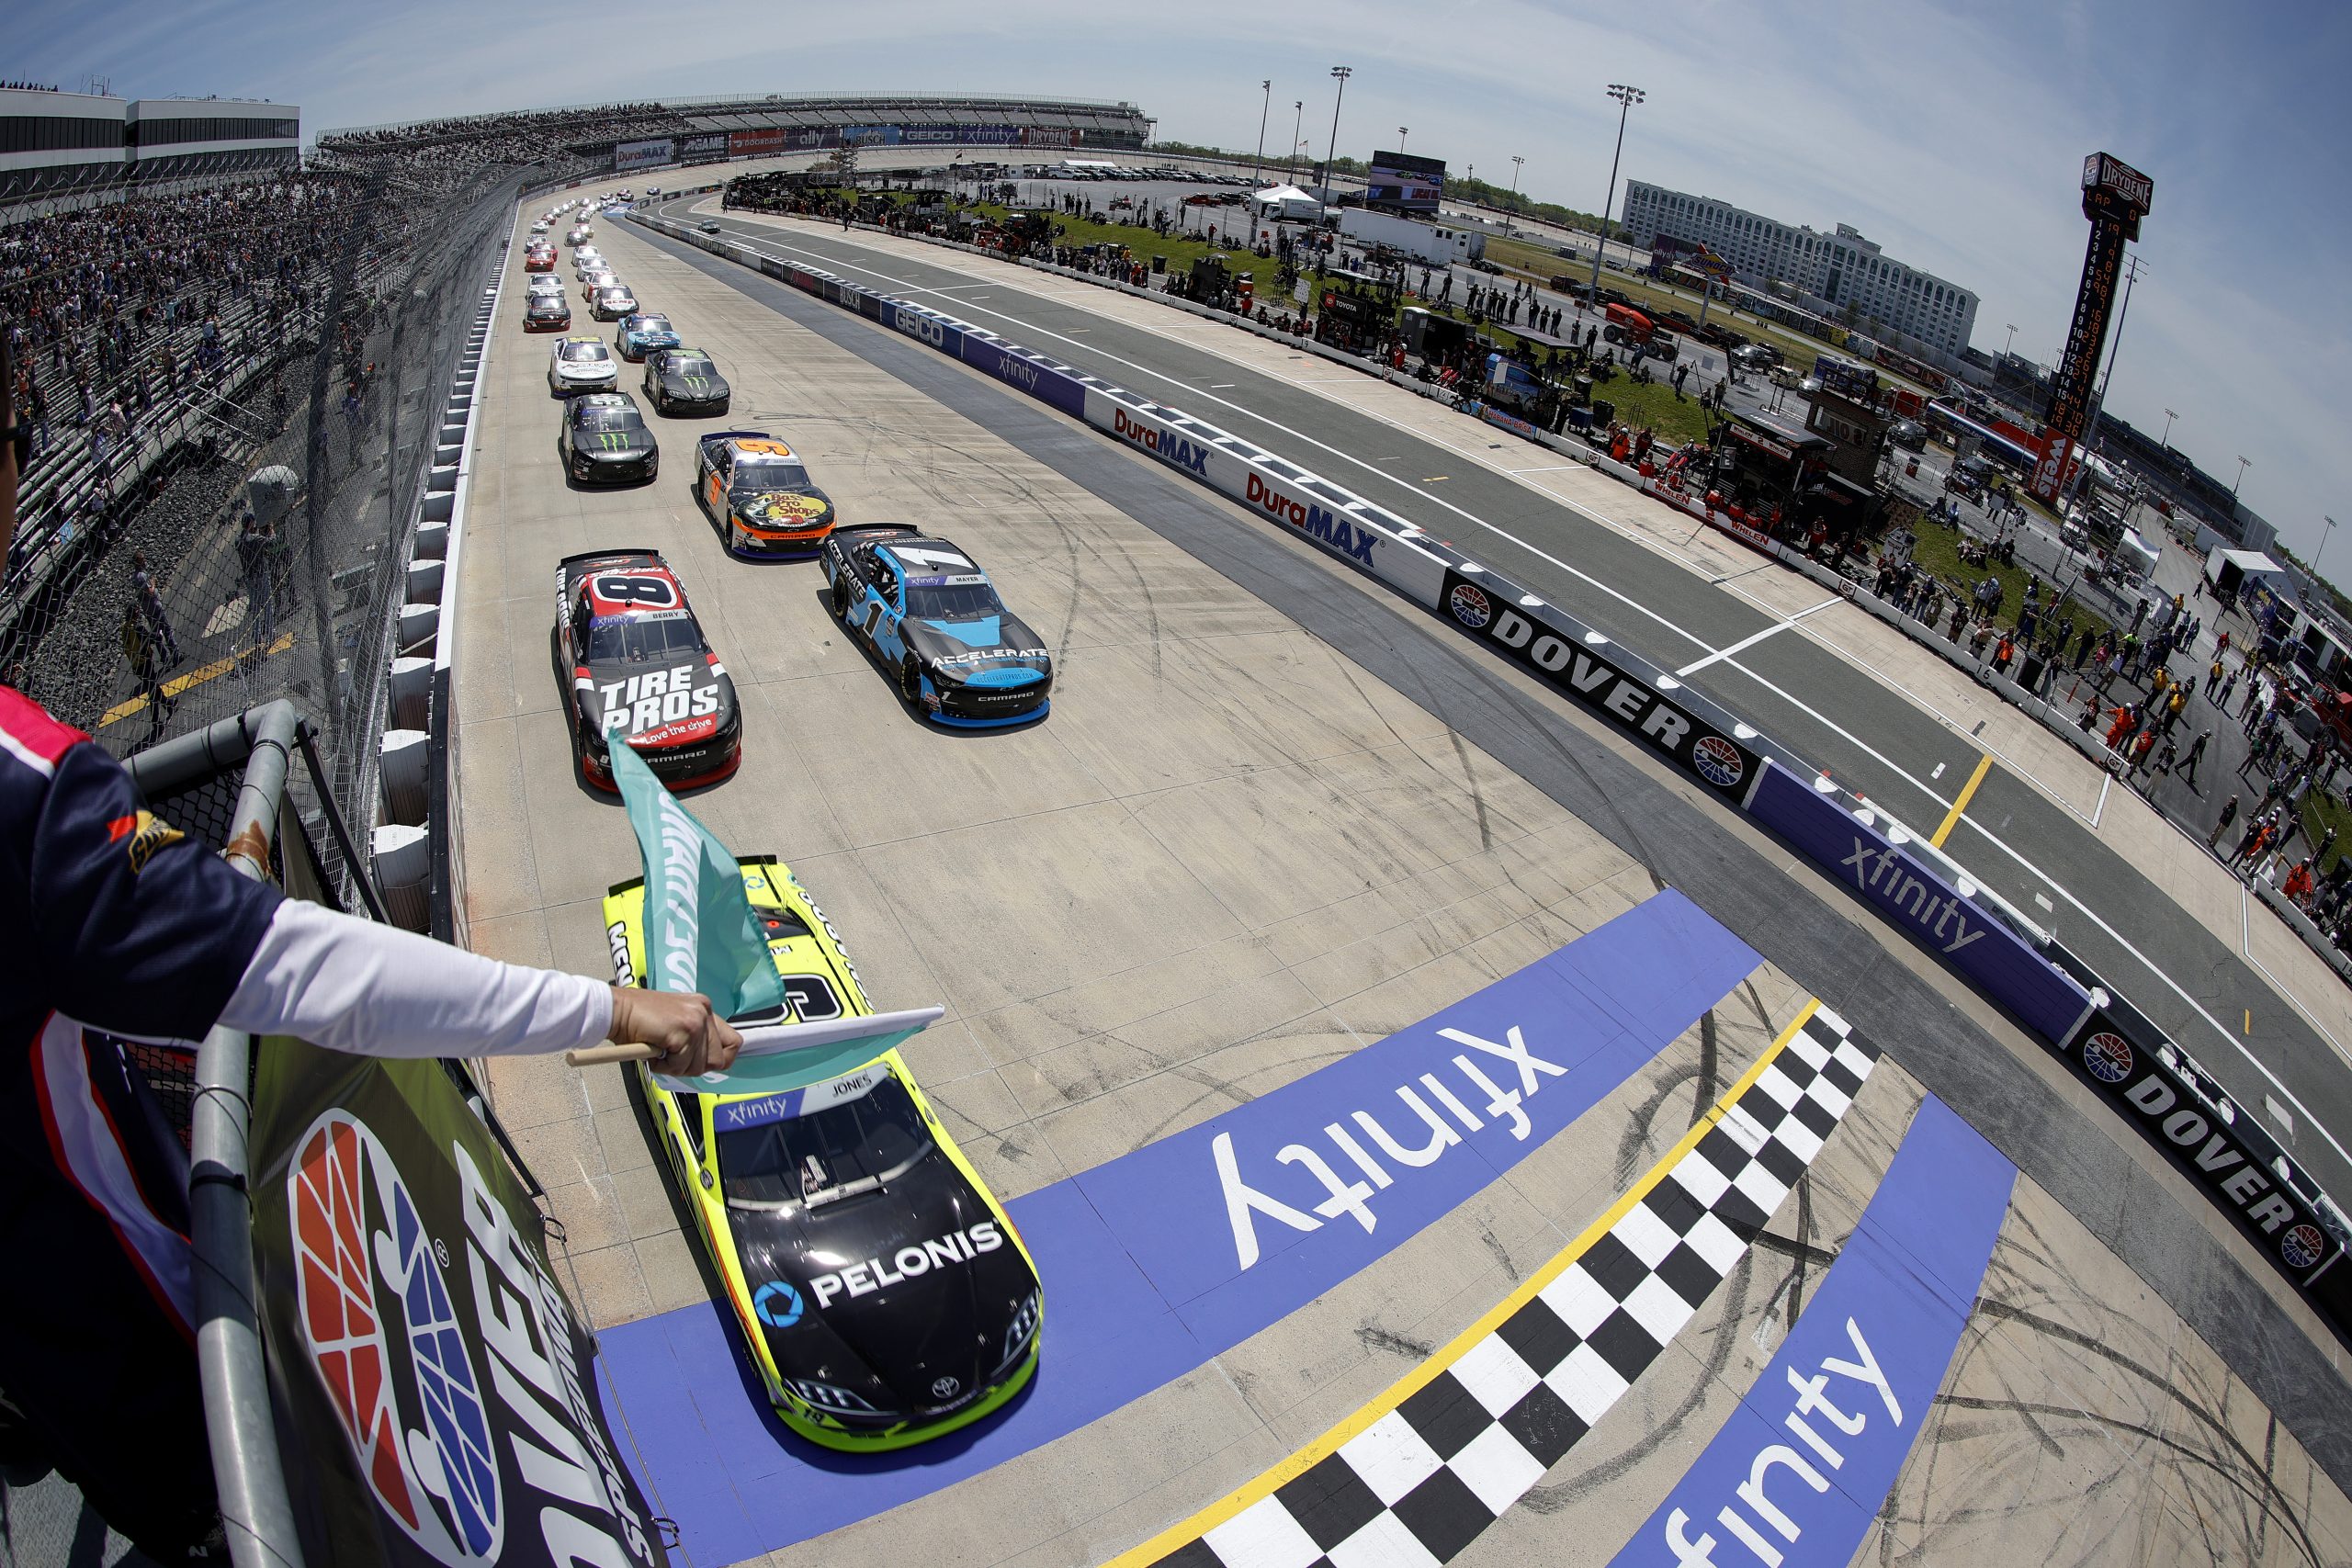 Credit: DOVER, DELAWARE - APRIL 30: Brandon Jones, driver of the #19 Menards/Pelonis Toyota, leads the field to the green flag to start the NASCAR Xfinity Series A-GAME 200 at Dover Motor Speedway on April 30, 2022 in Dover, Delaware. (Photo by Tim Nwachukwu/Getty Images)